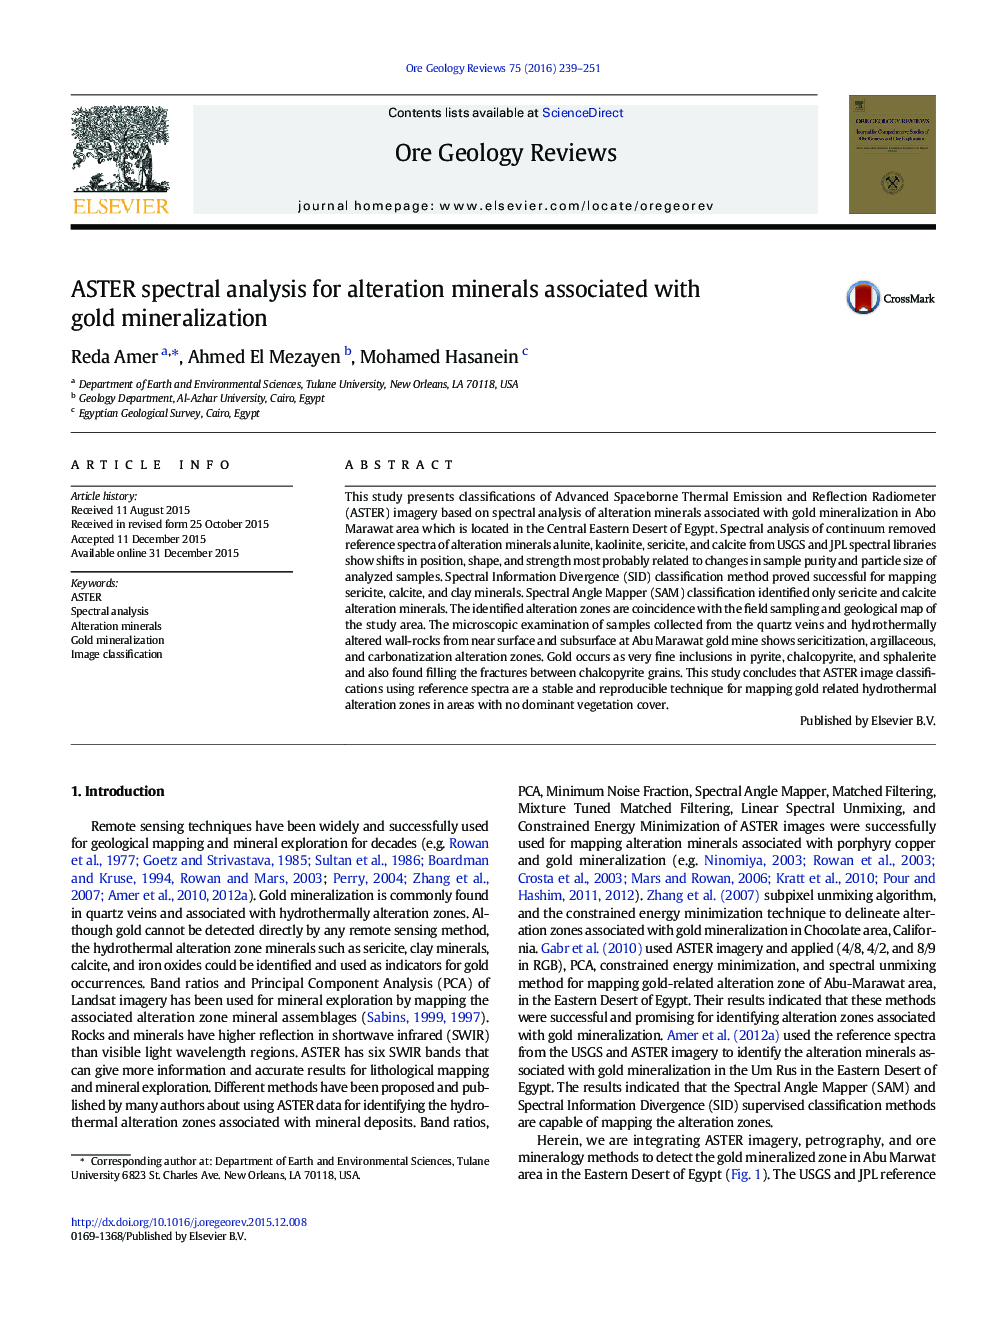 ASTER spectral analysis for alteration minerals associated with gold mineralization